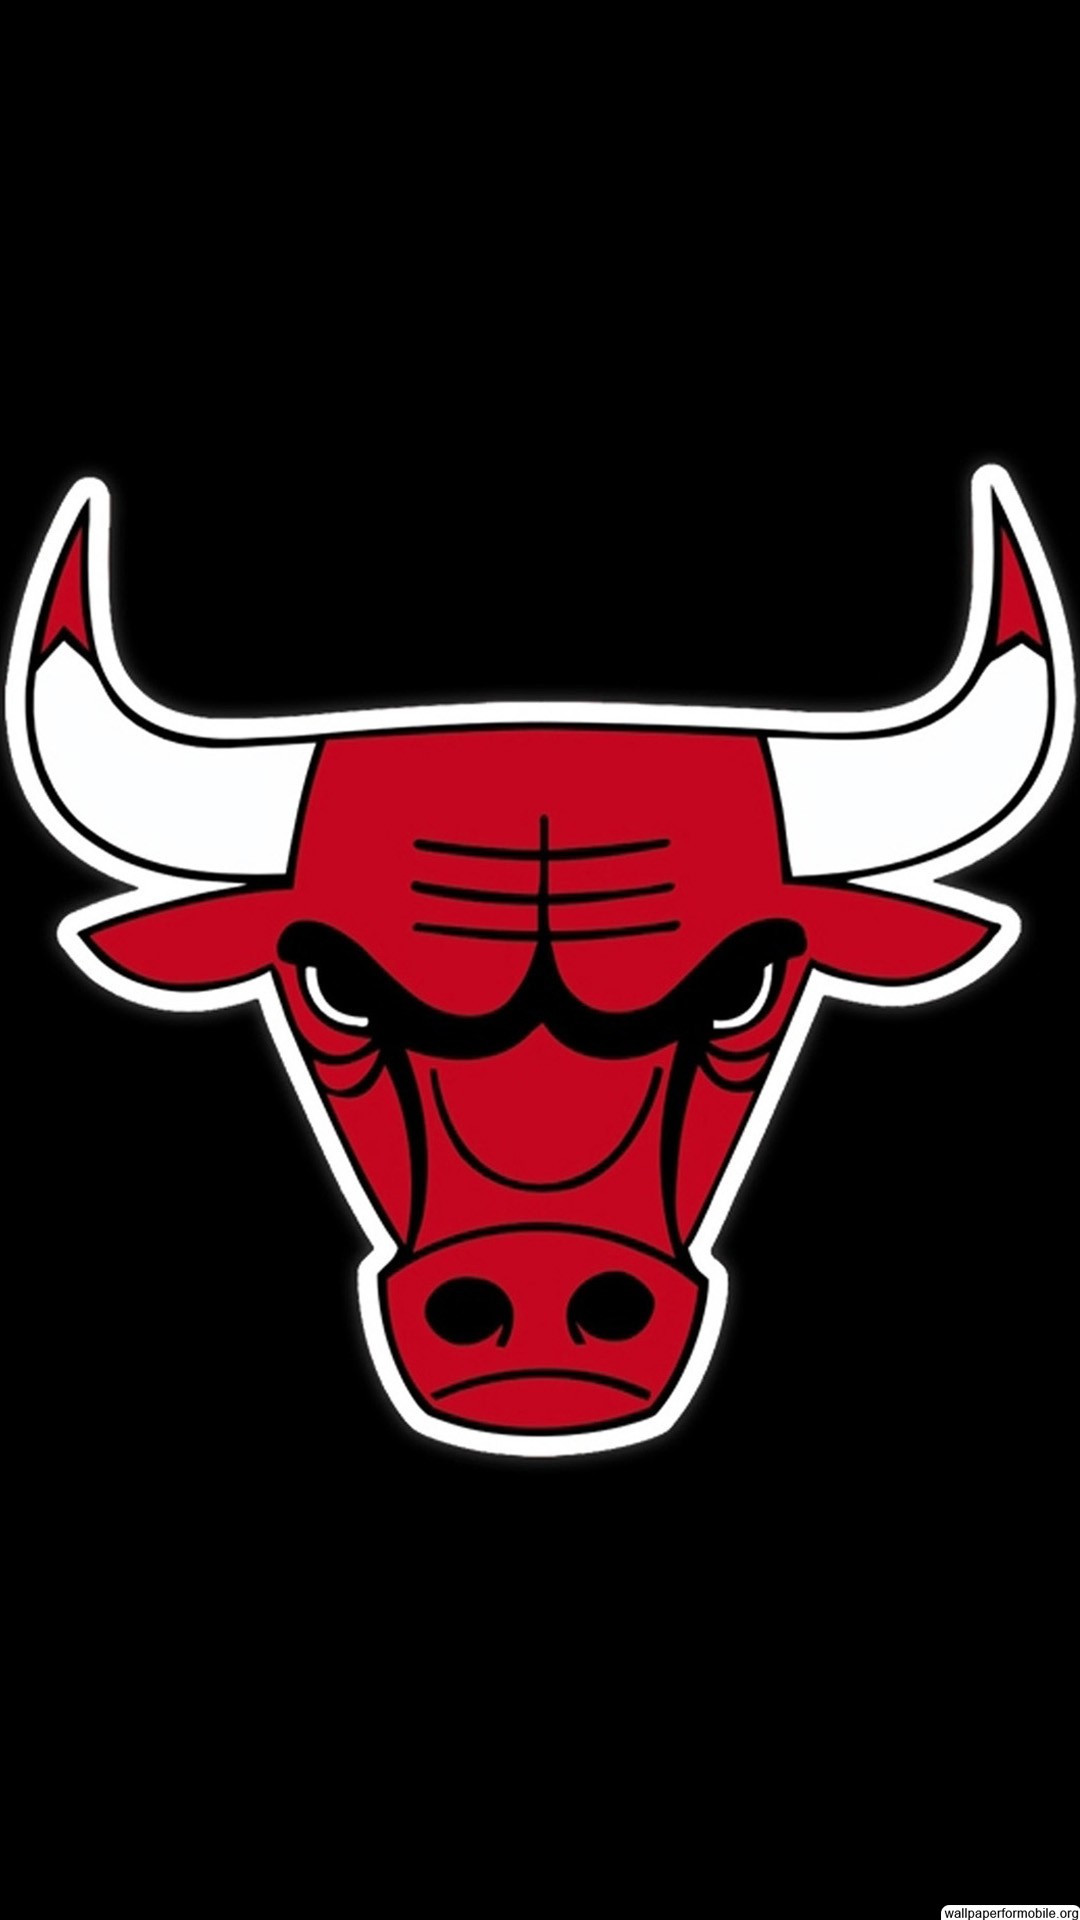 1080x1920 Lovers Gifts Chicago Bulls Look Iphone 7 Leather Case, Best Design Shell  Skin Protector Cover